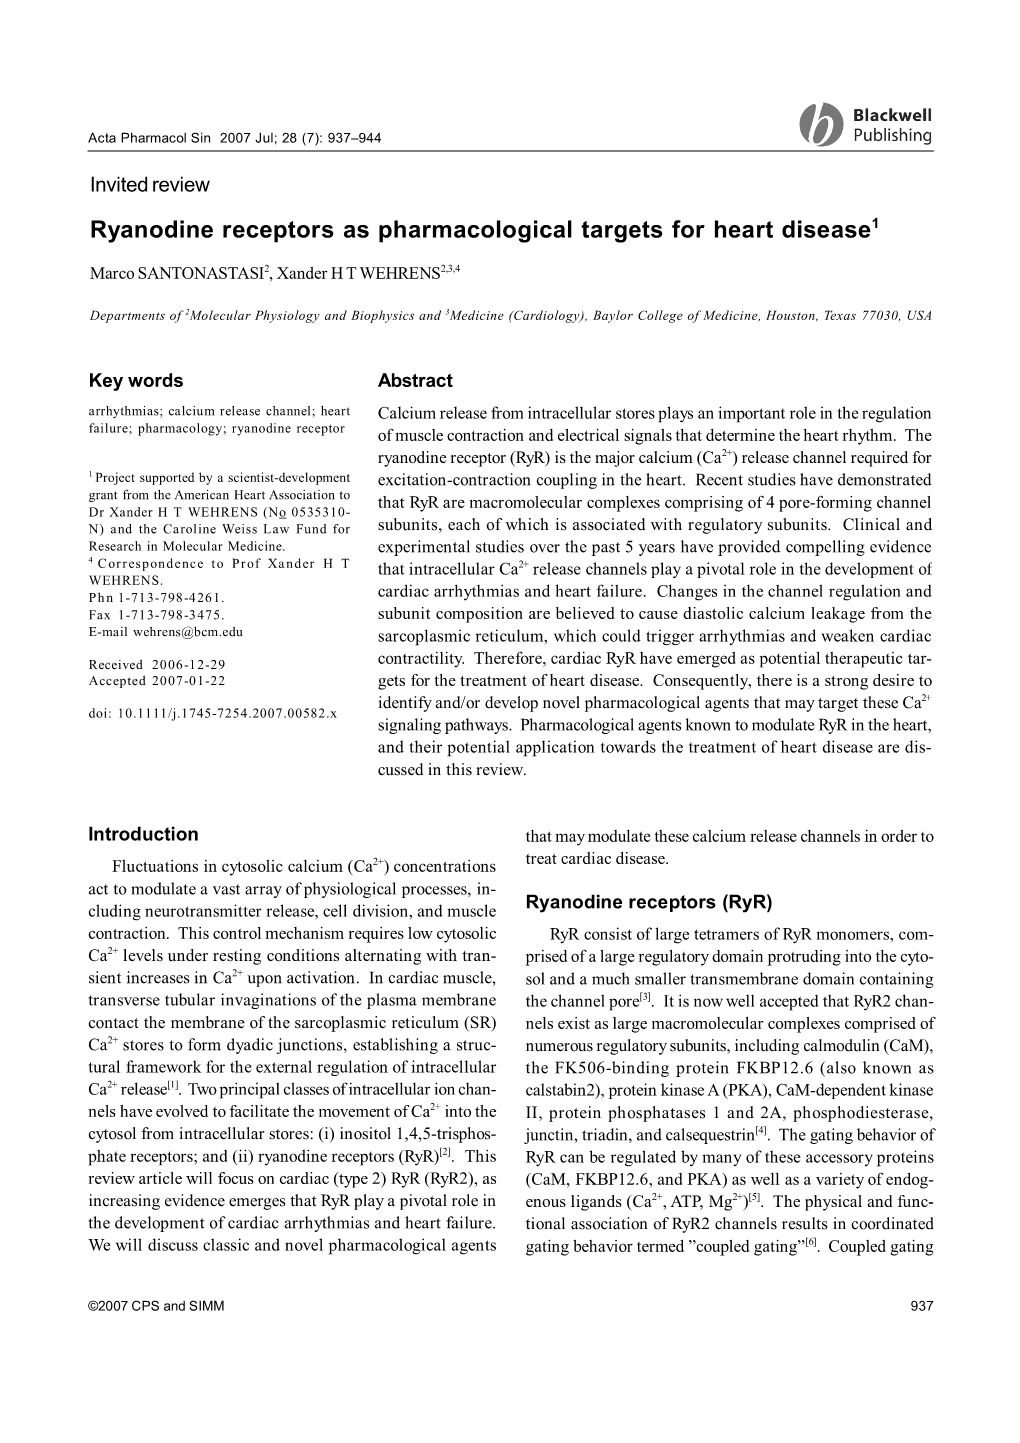 Invited Review Ryanodine Receptors As Pharmacological Targets for Heart Disease1